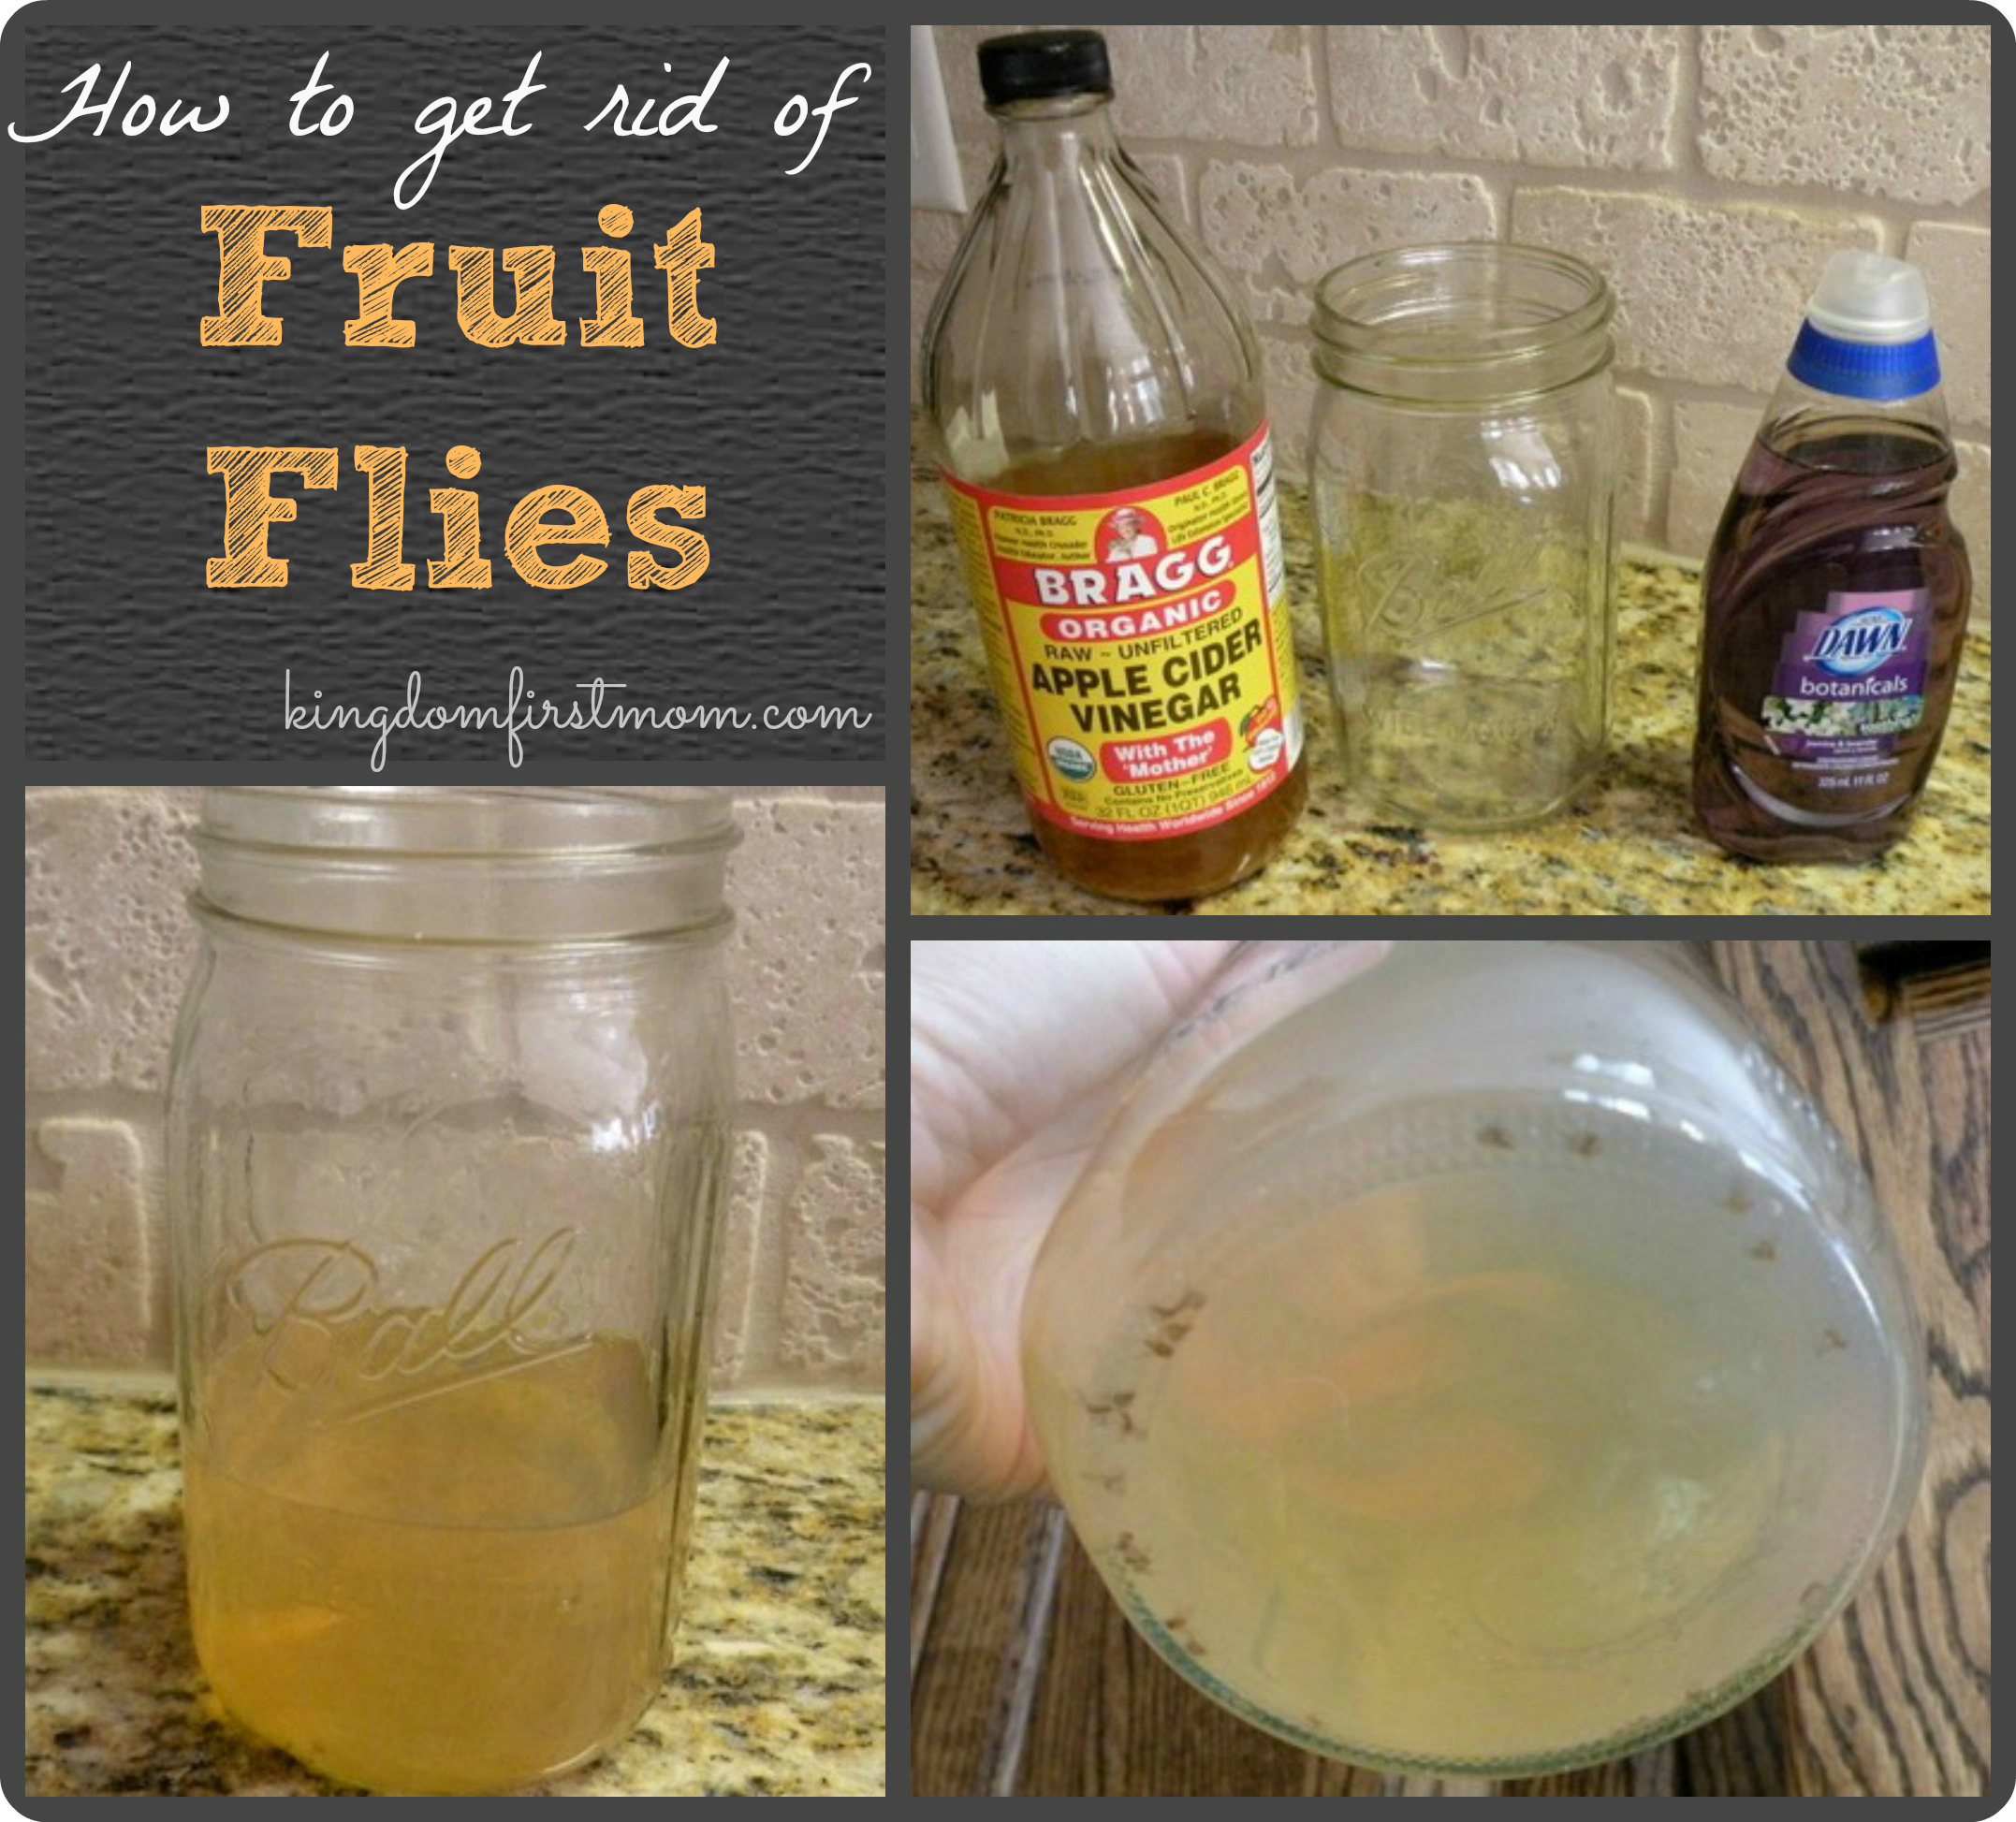 https://www.amylovesit.com/wp-content/uploads/2011/07/how-to-get-rid-of-fruit-flies1.png